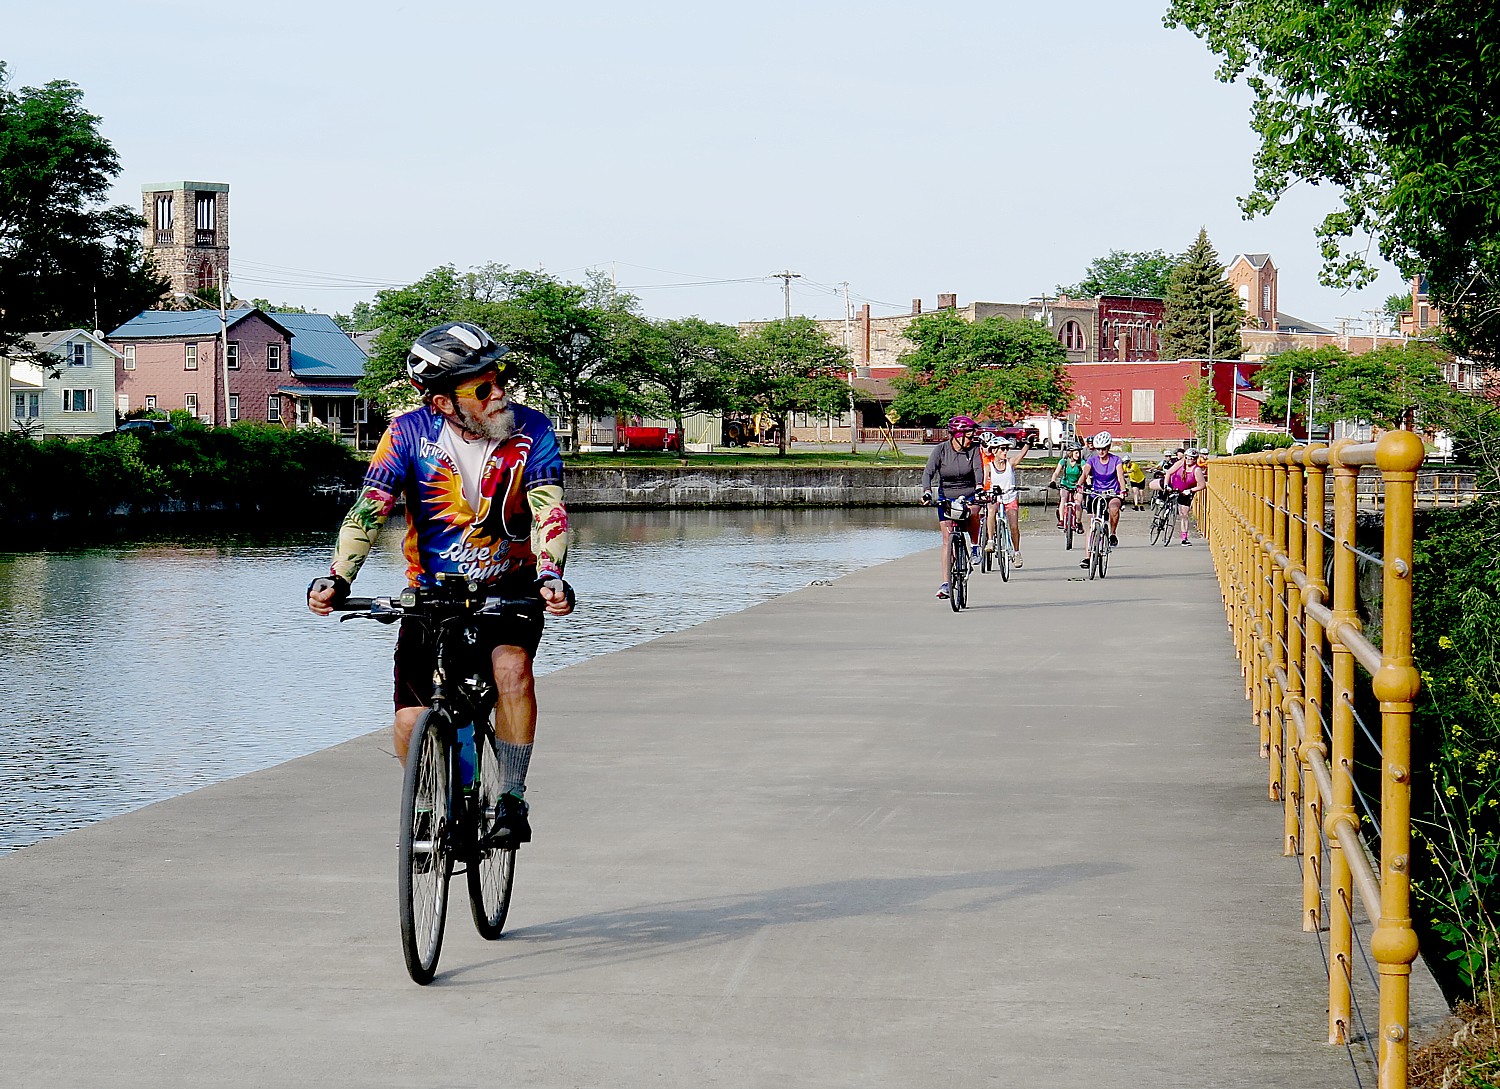 cycle the erie canal